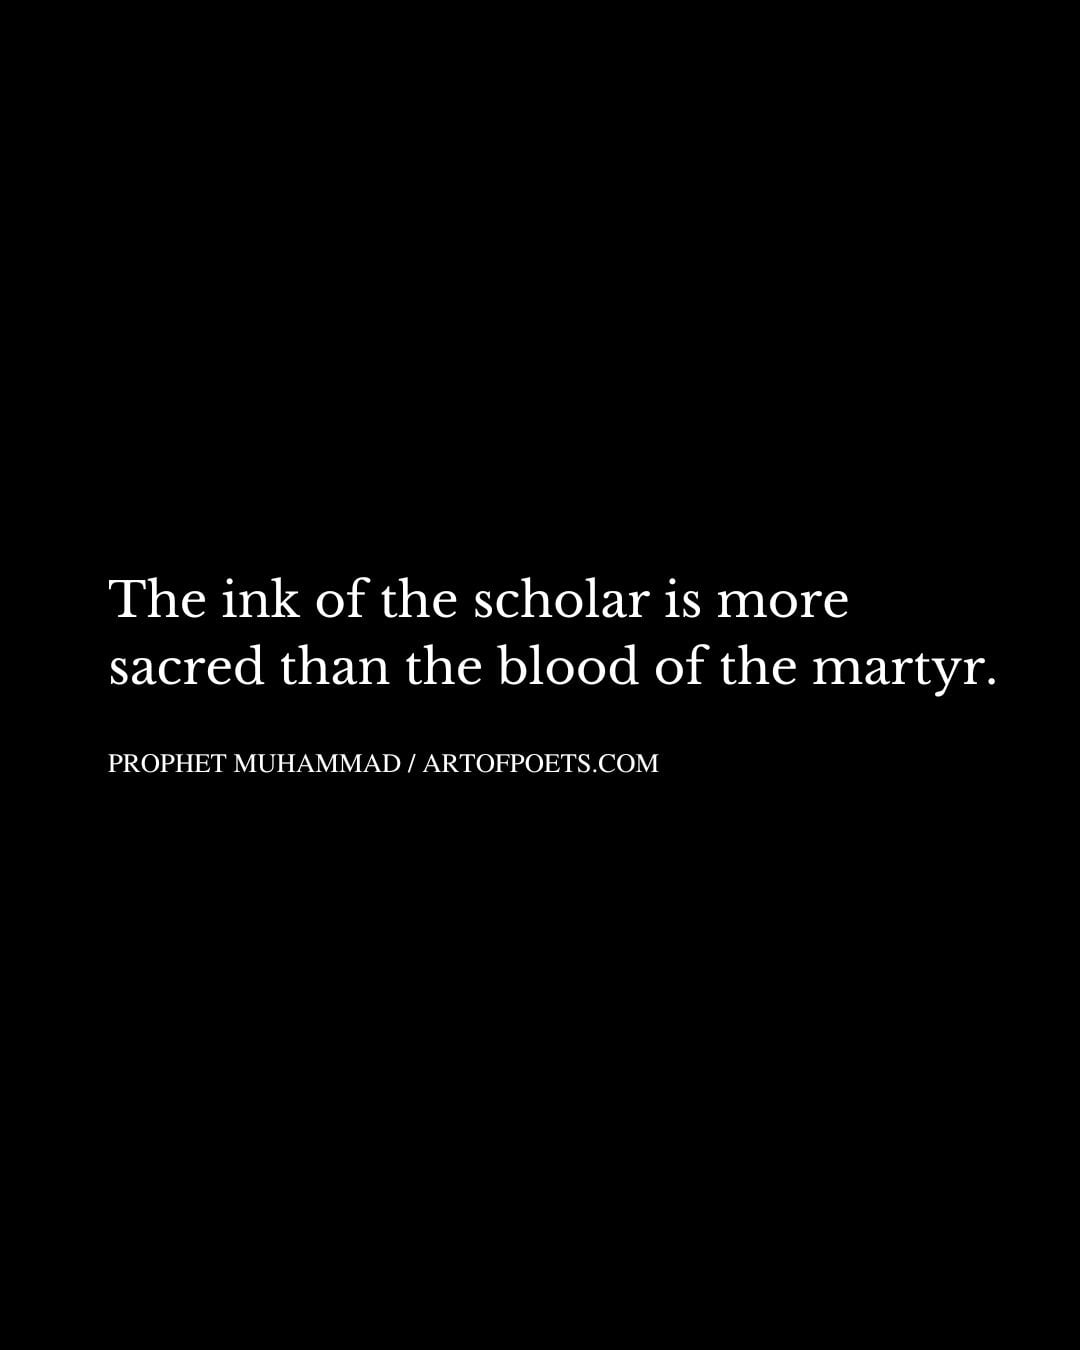 The ink of the scholar is more sacred than the blood of the martyr